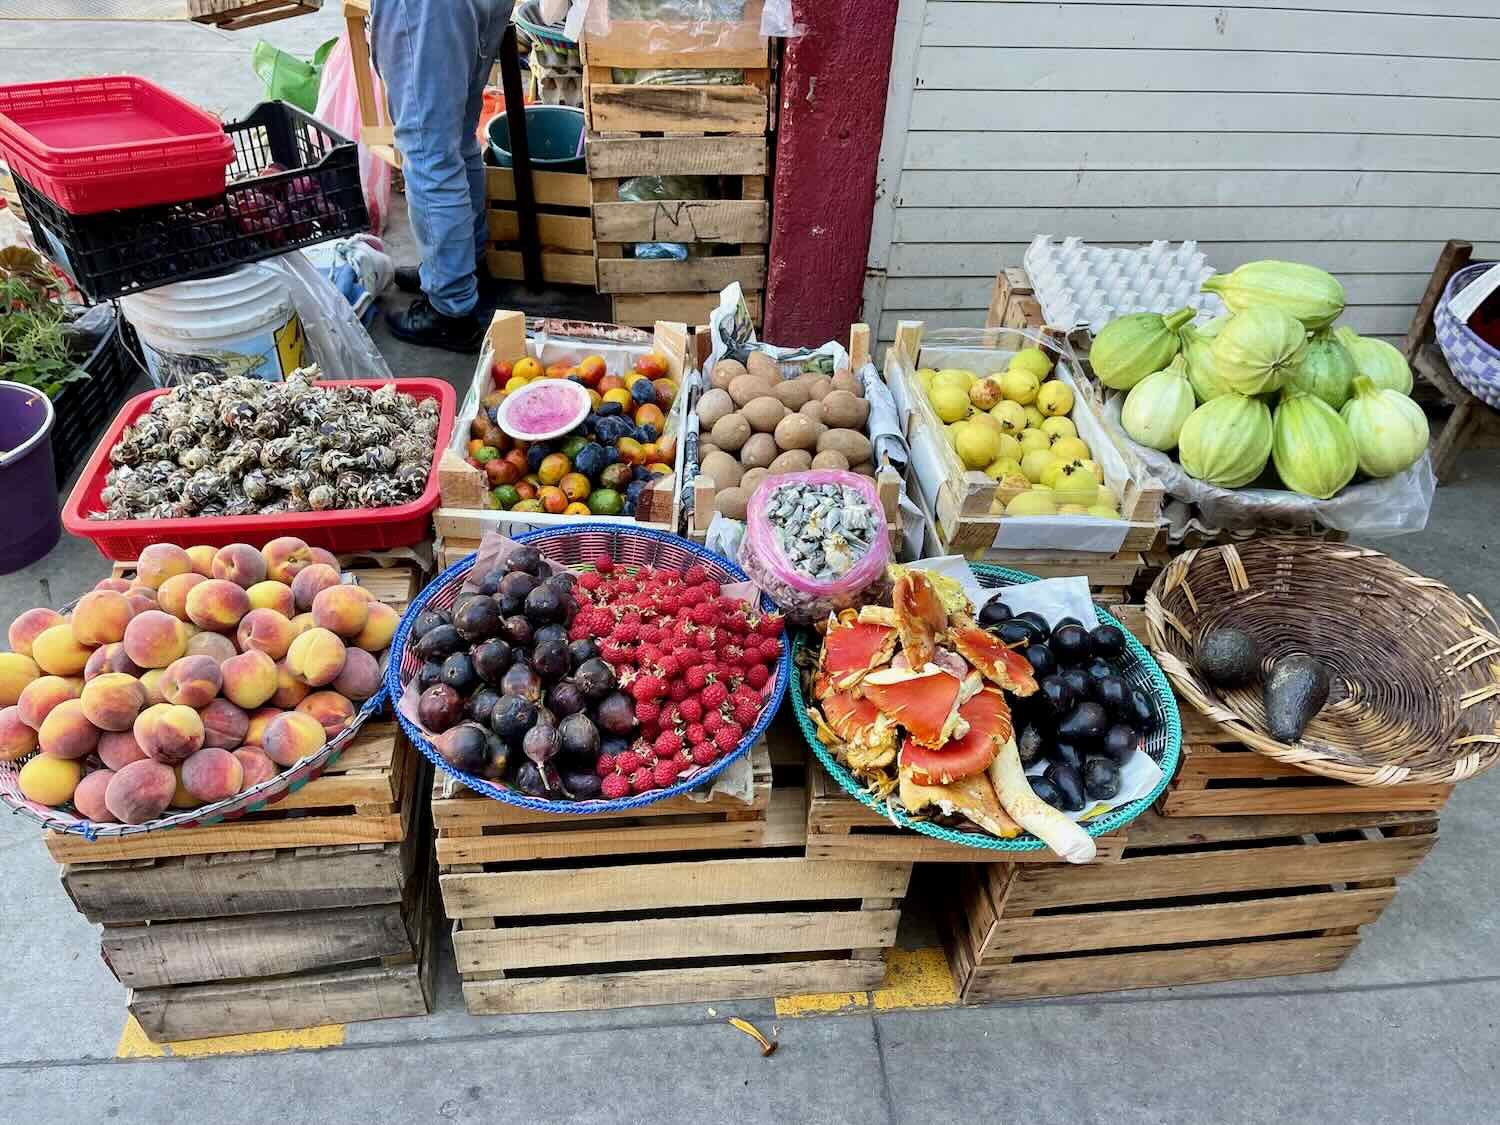 Fruits, both familiar and less so